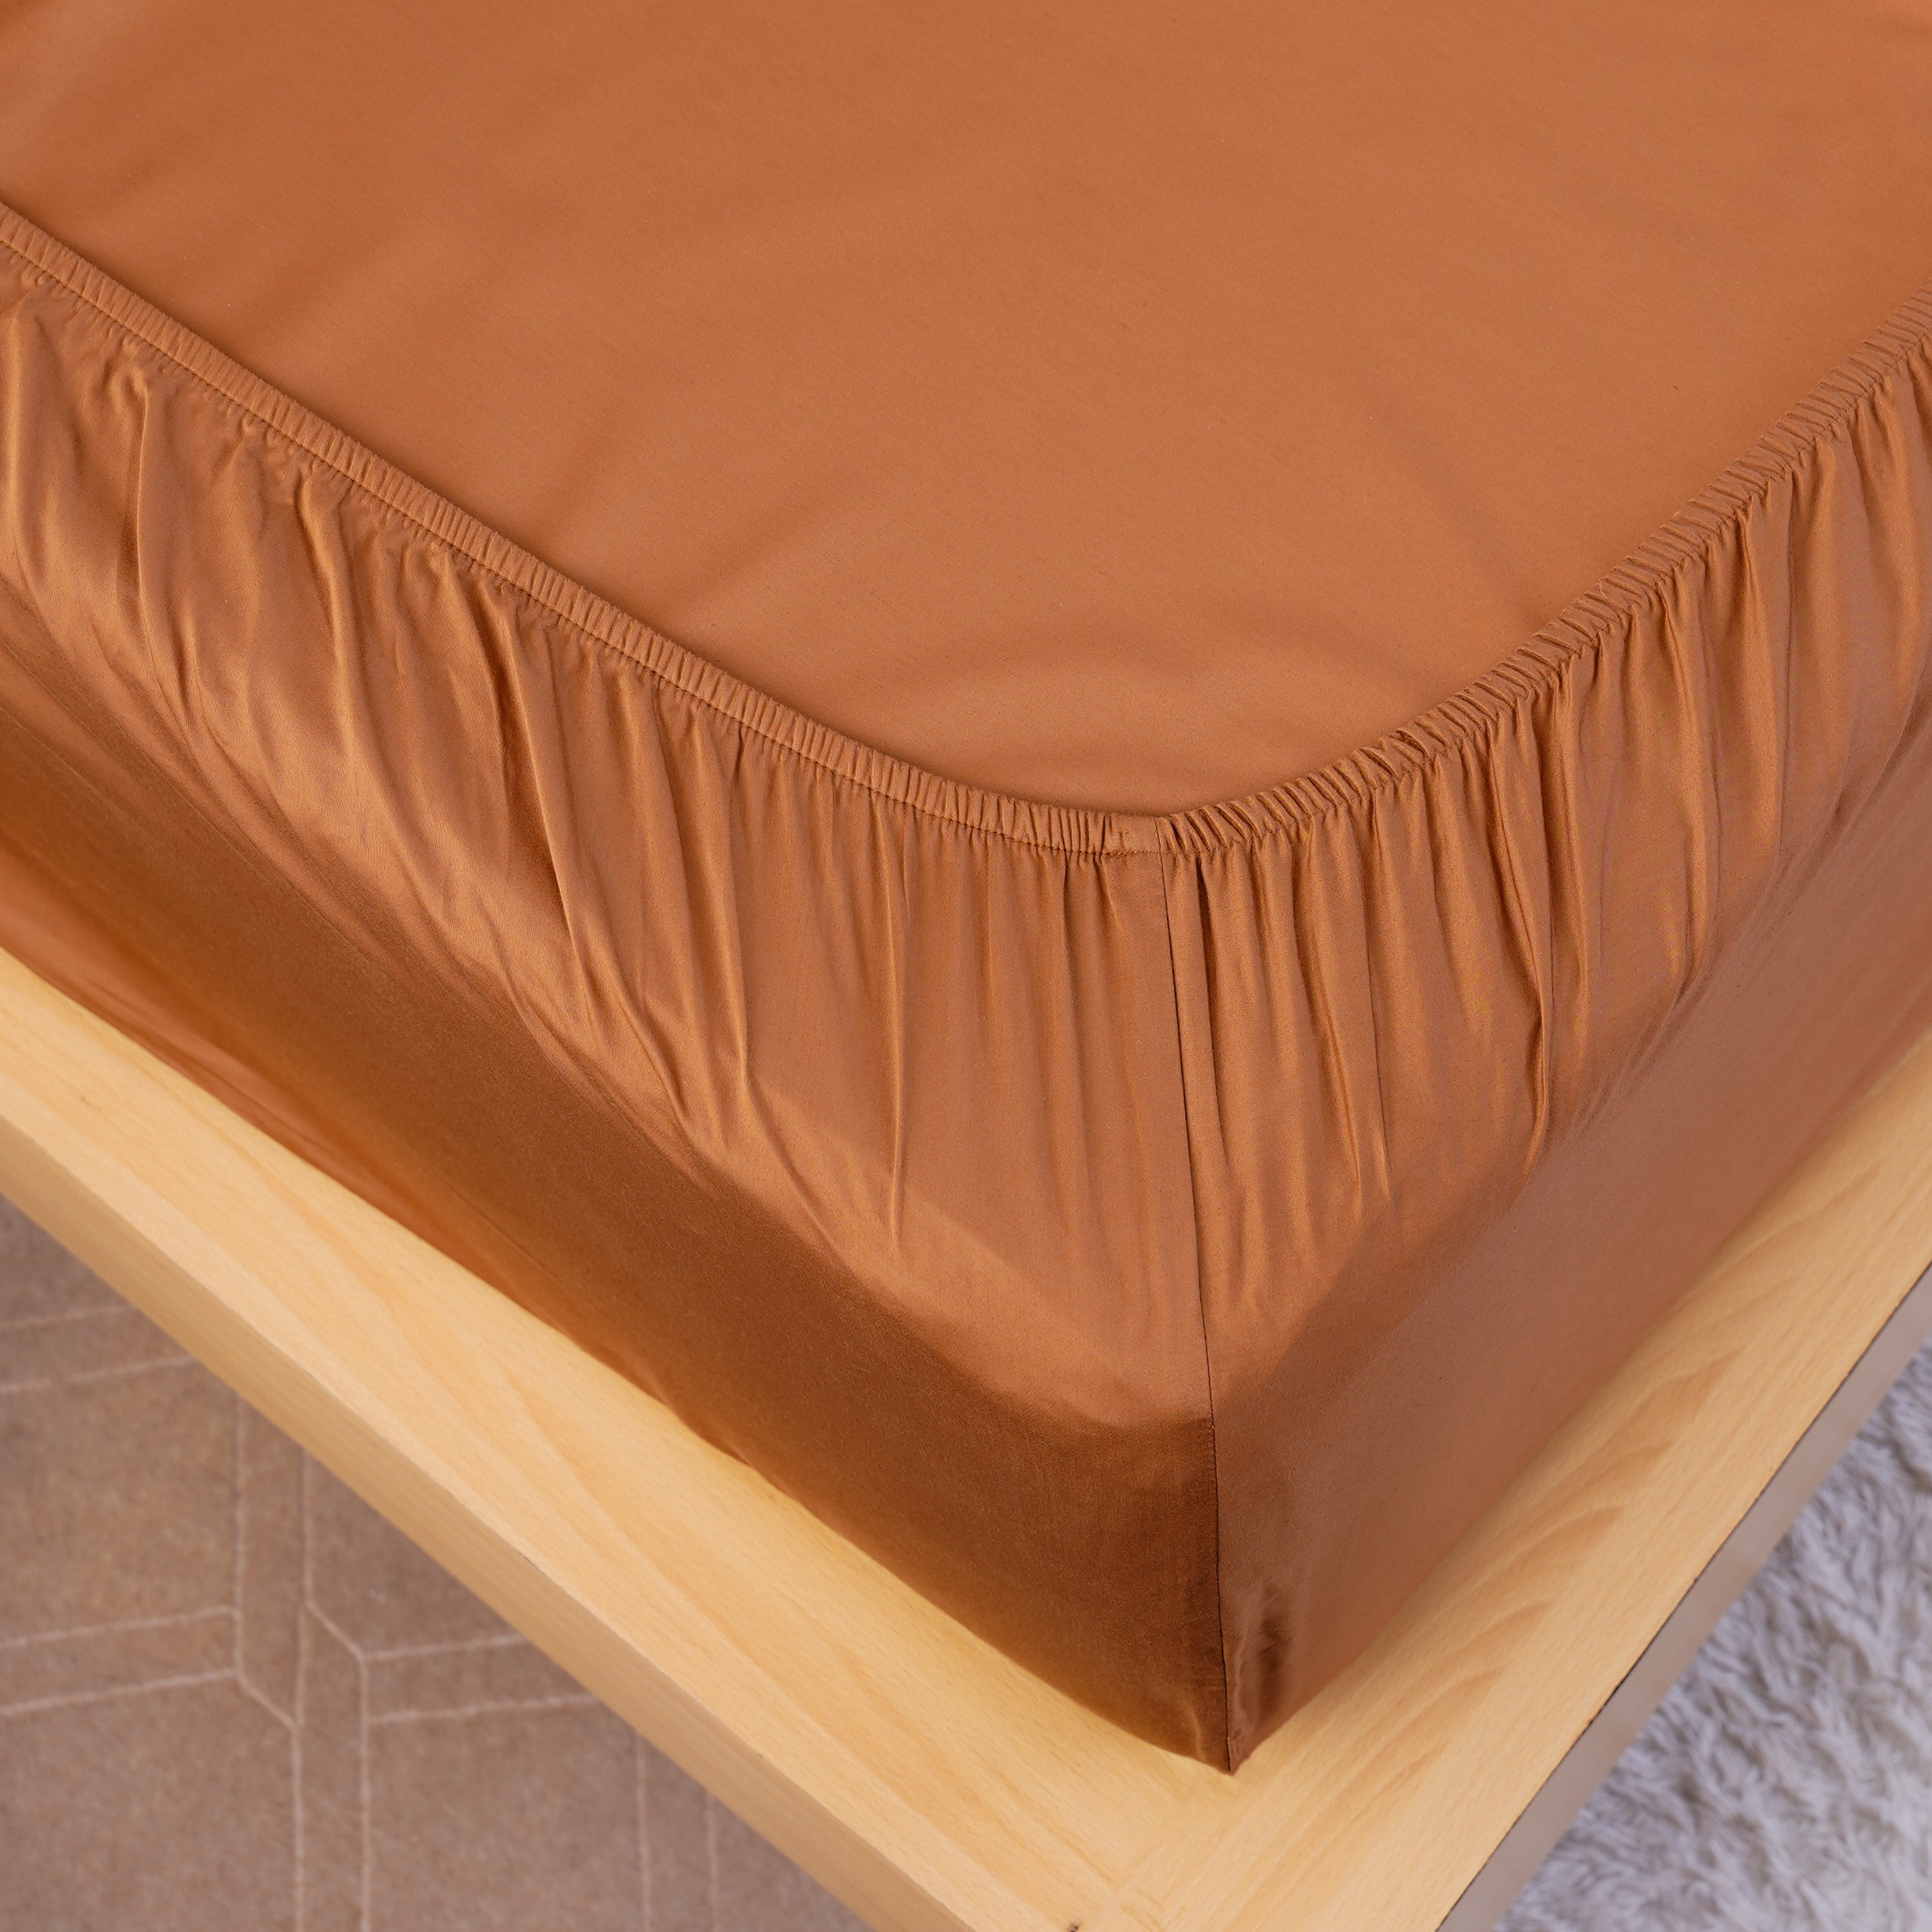 Ackly Bamboo - Terracotta Fitted Sheet - SHEET STORY - 4